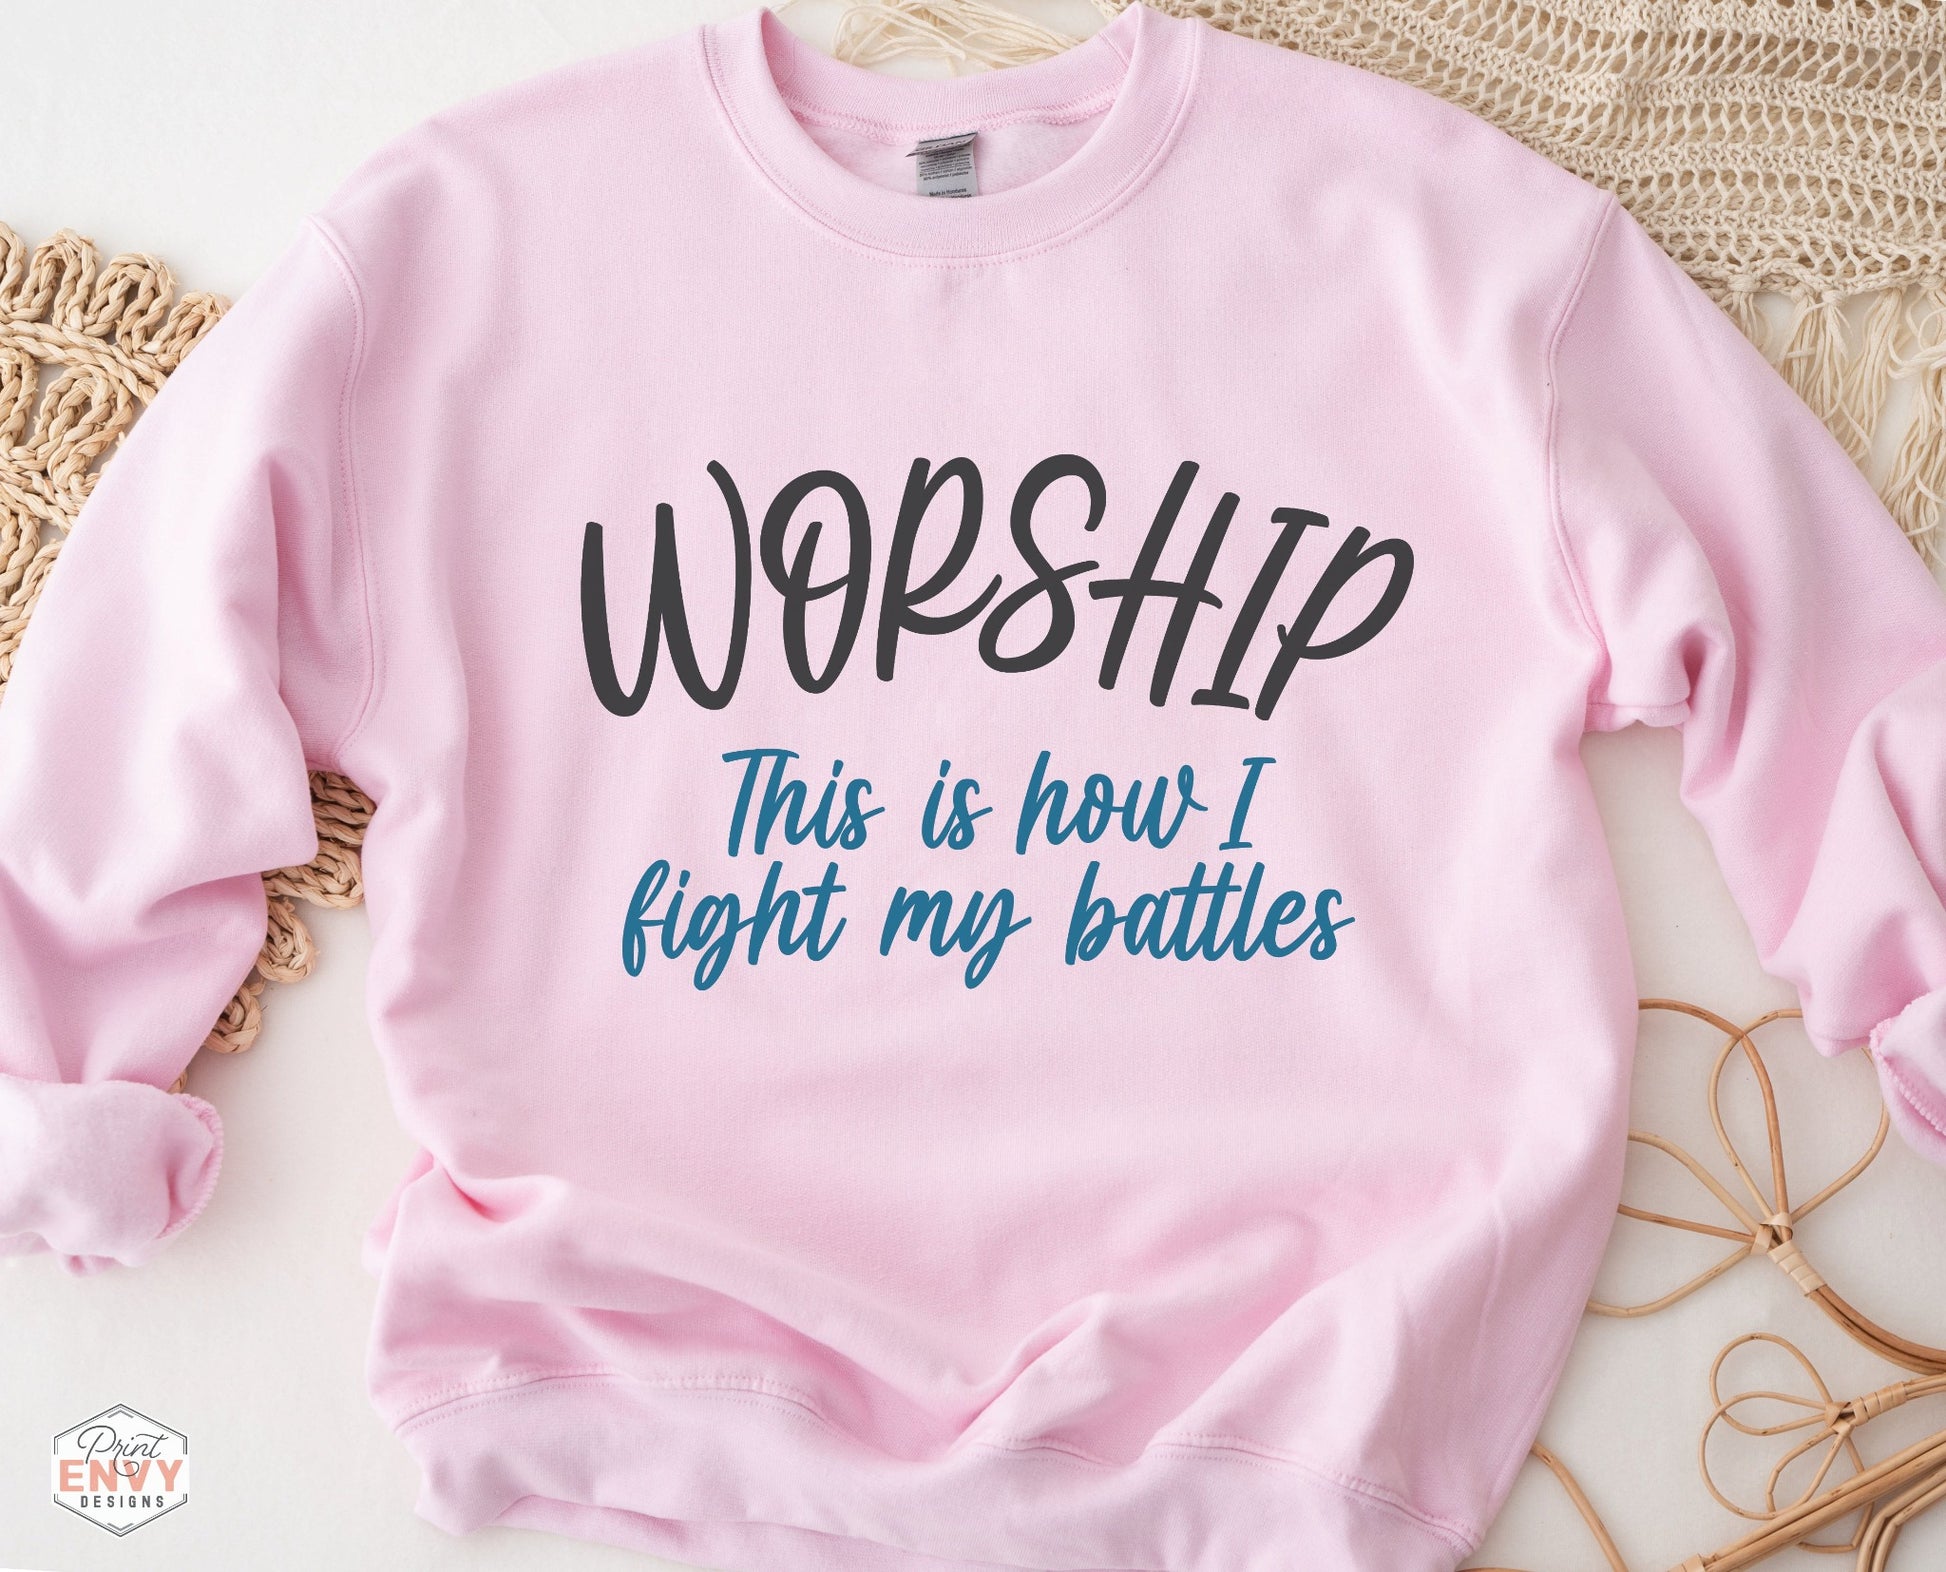 Worship This Is How I Fight My Battles Christian aesthetic unisex crewneck sweatshirt design printed in charcoal and teal on cozy light pink sweater for women, great gift for worship leaders